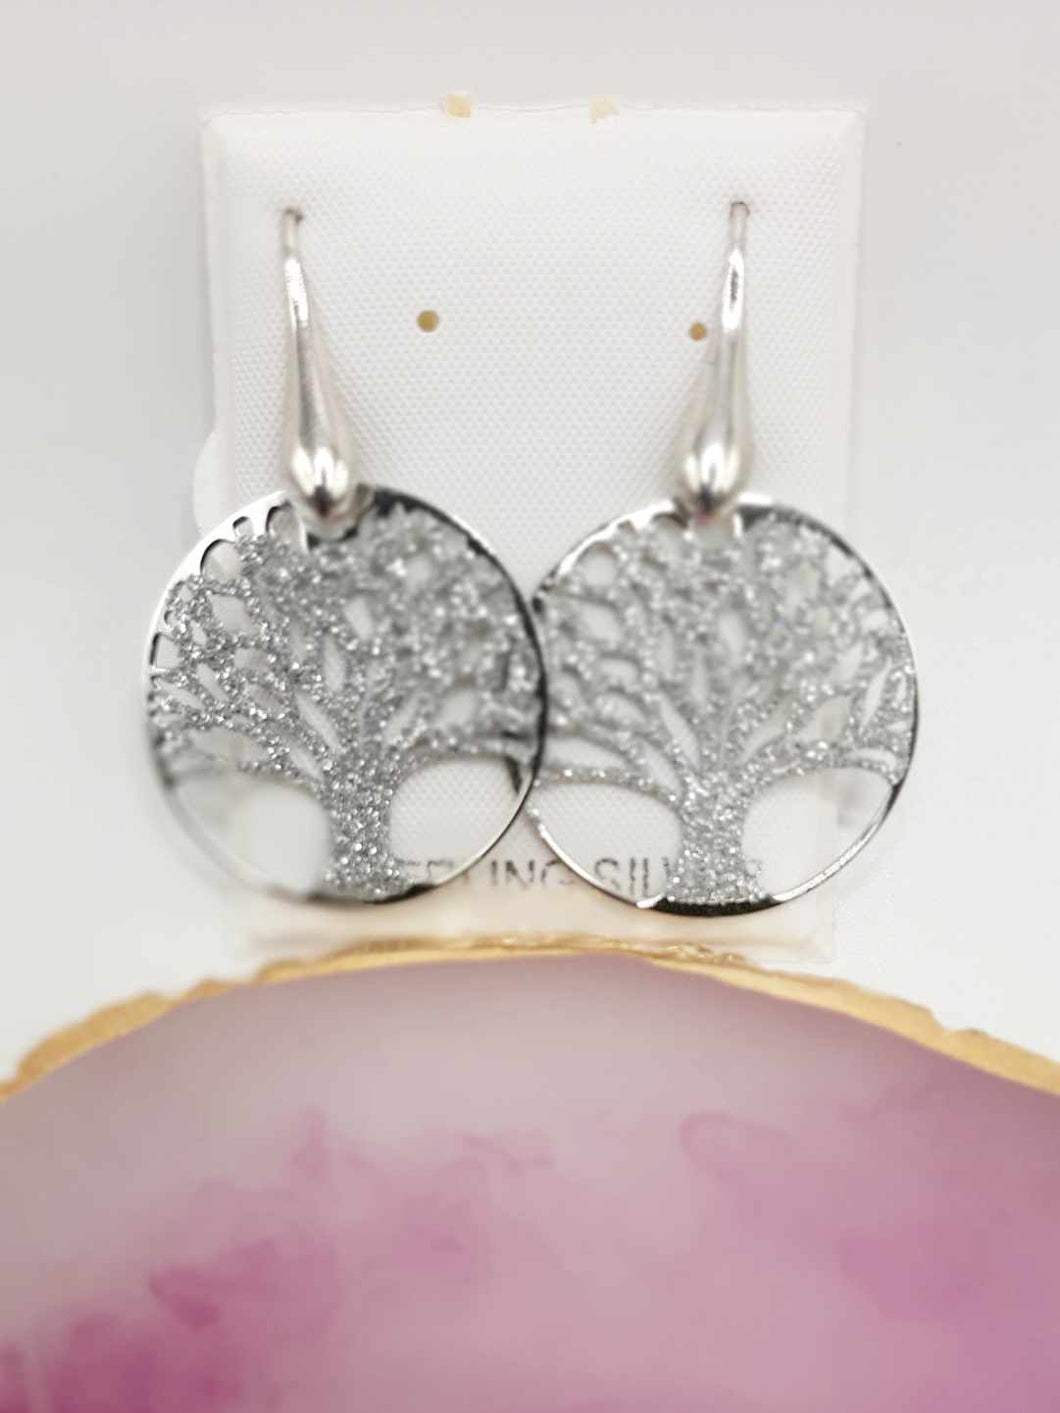 Sterling Silver Tree of Life Earrings Featuring a Diamond Cut Finish with French Wire Backs